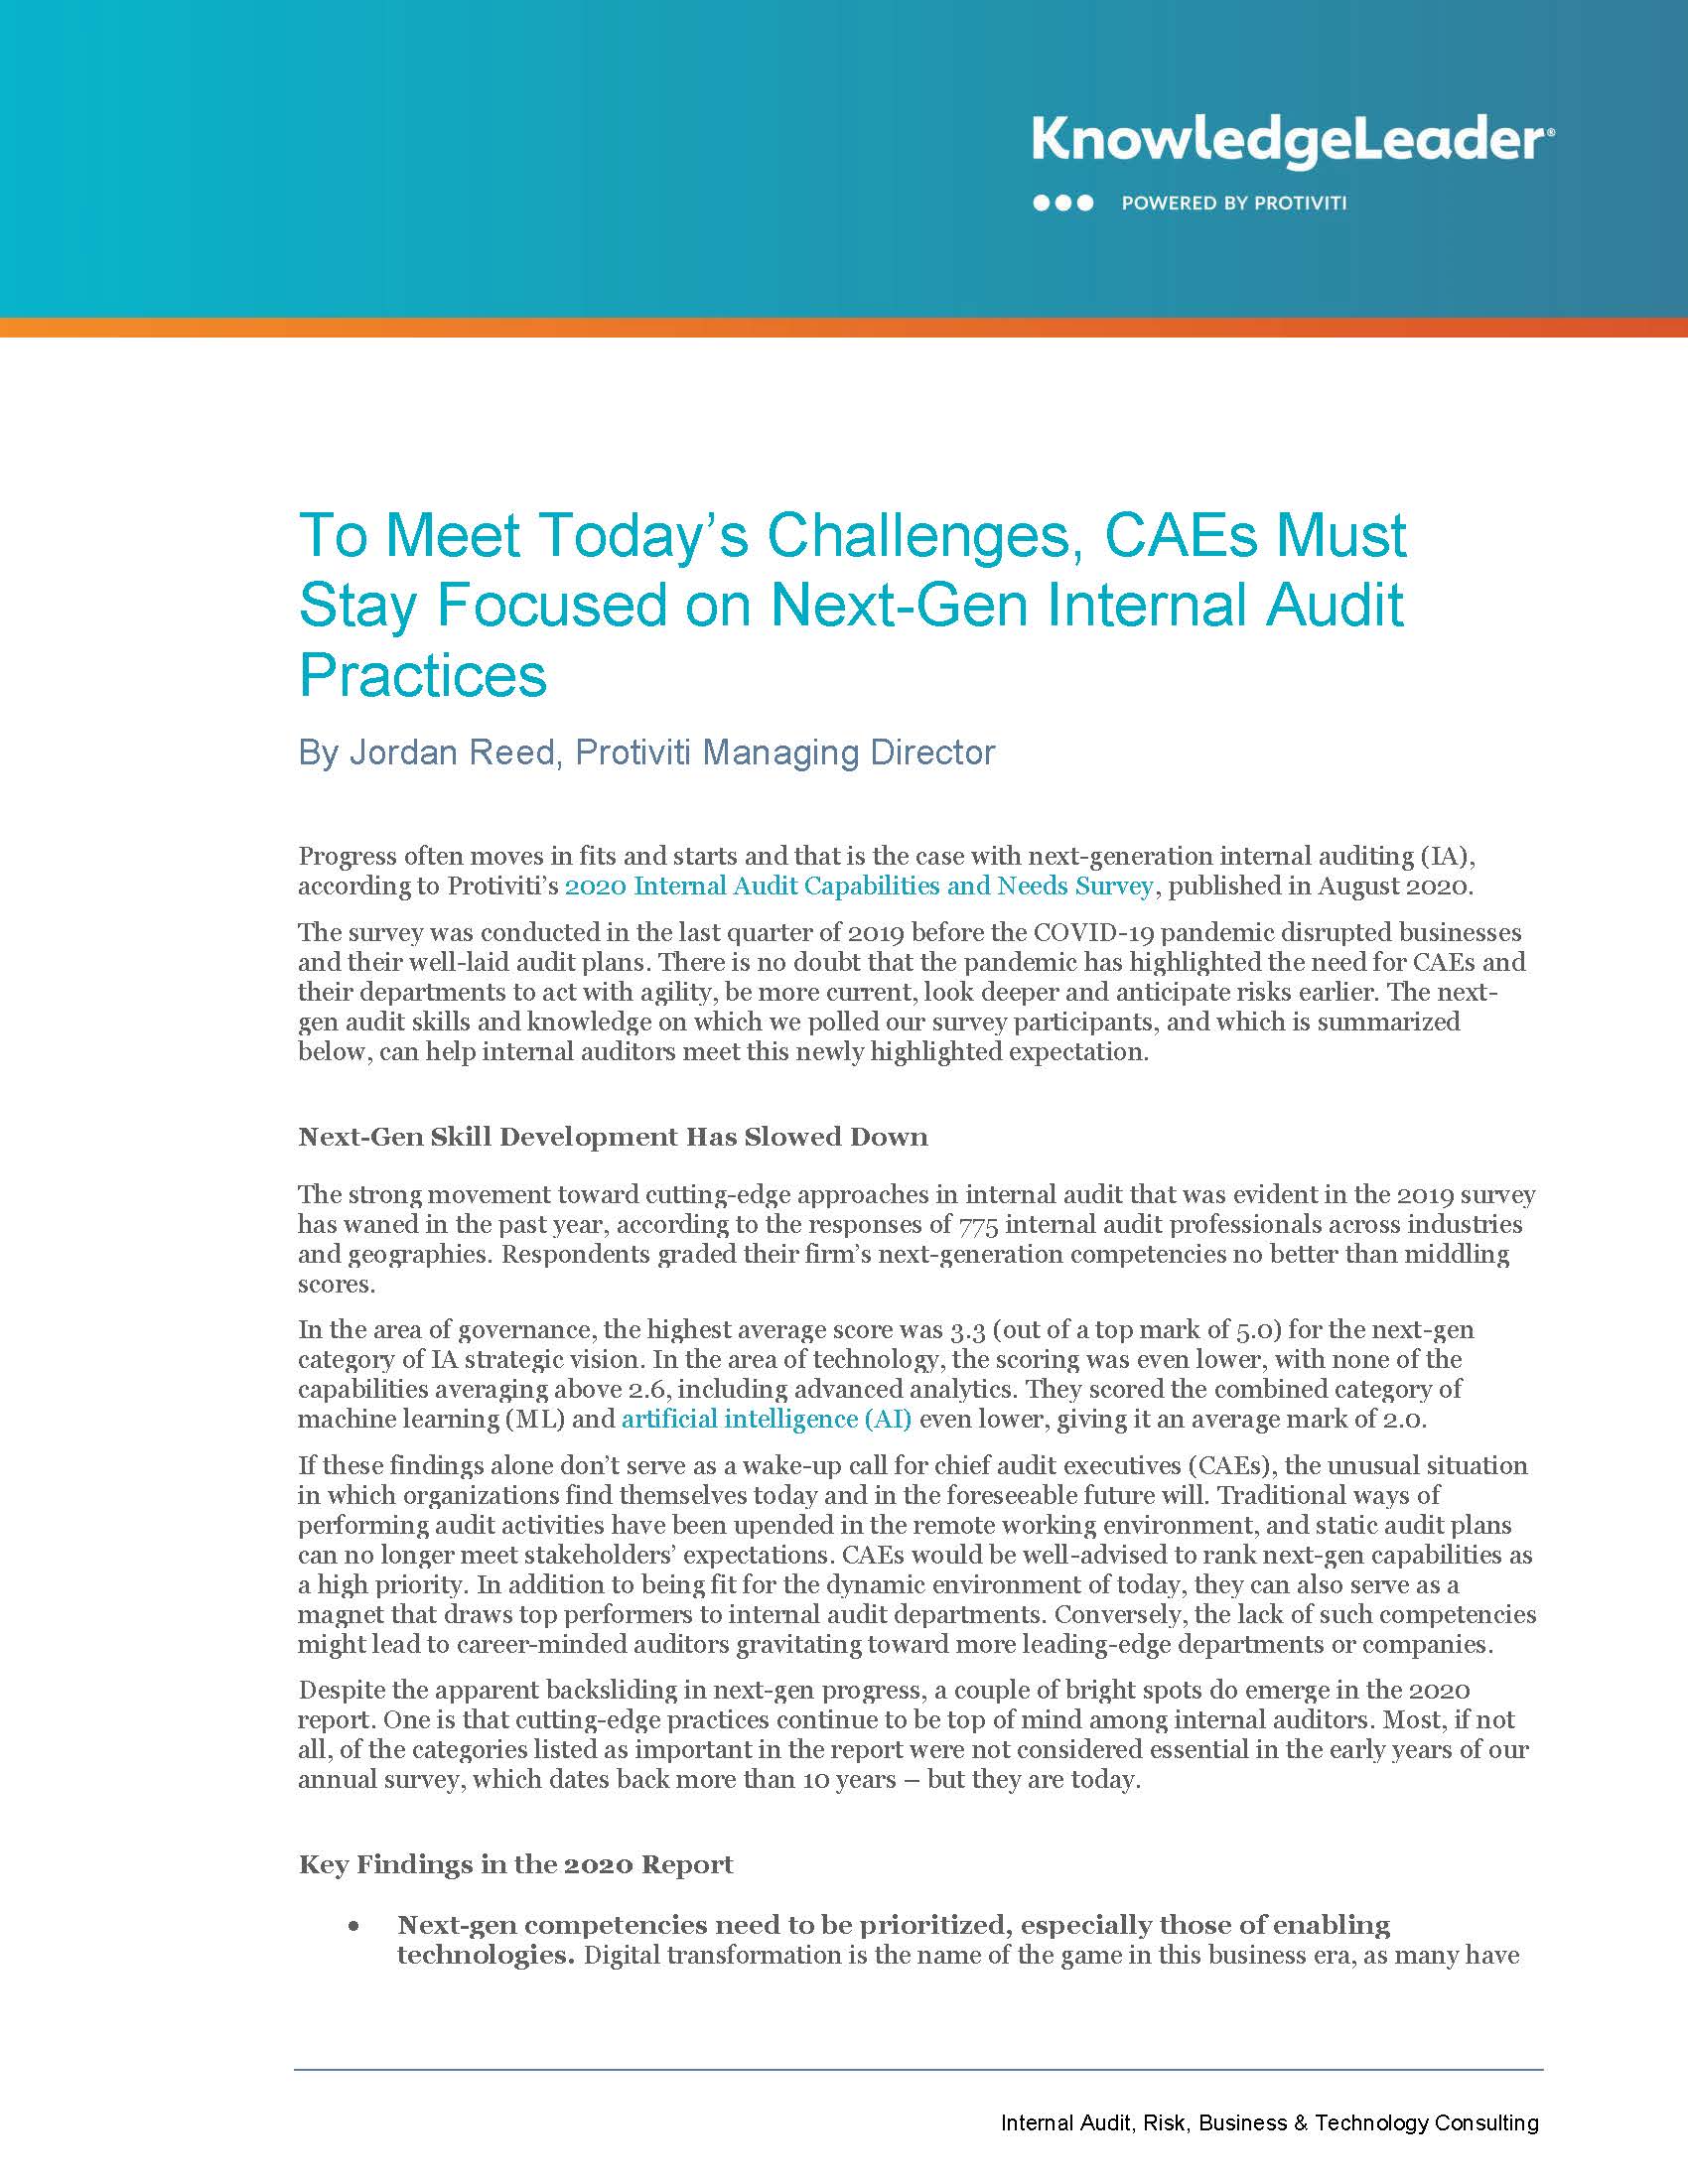 Screenshot of the first page of To Meet Today’s Challenges, CAEs Must Stay Focused on Next-Gen Internal Audit Practices